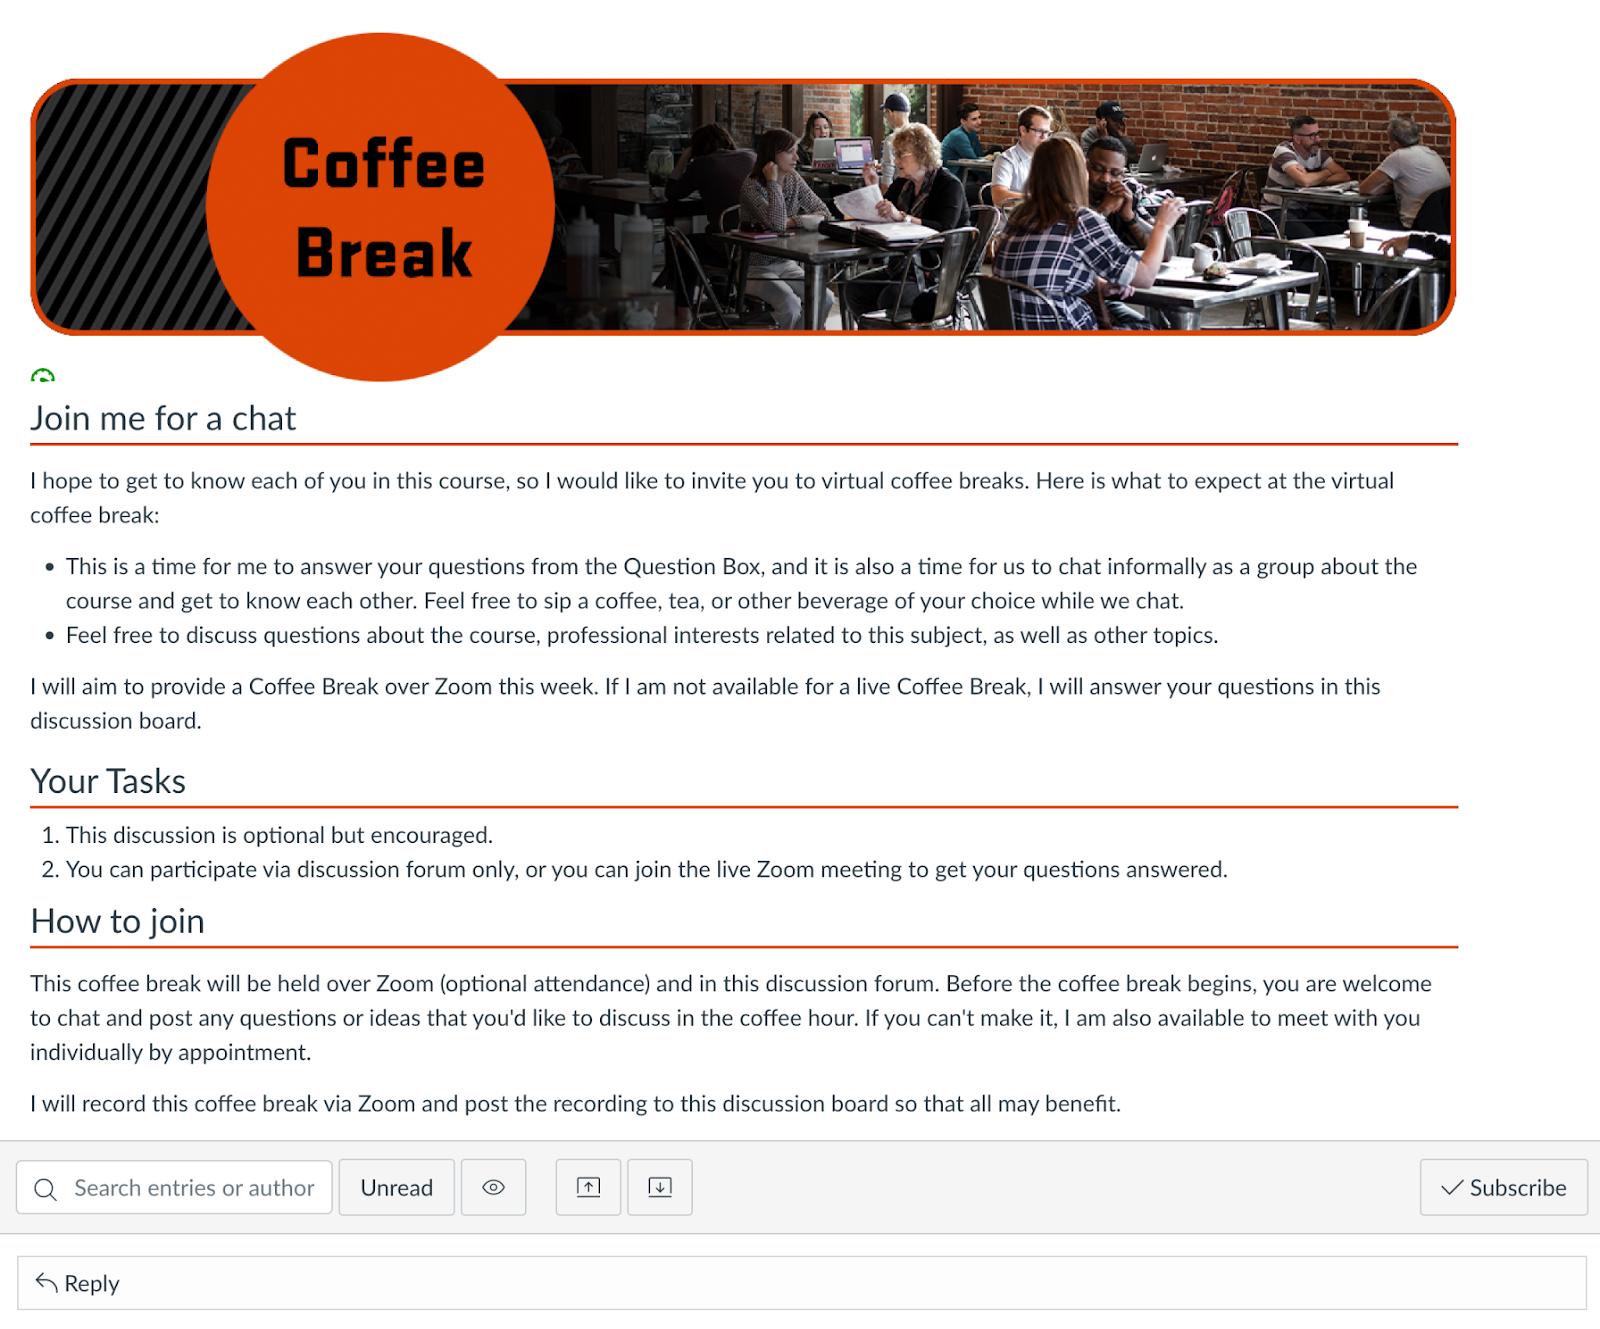 Canvas page shows a banner image titled "Coffee Break" and  "Join me for a chat. I hope to get to know each of you in this course, so I would like to invite you to virtual coffee breaks." The description on the page details expectations, tasks, and how to join the Coffee Break.